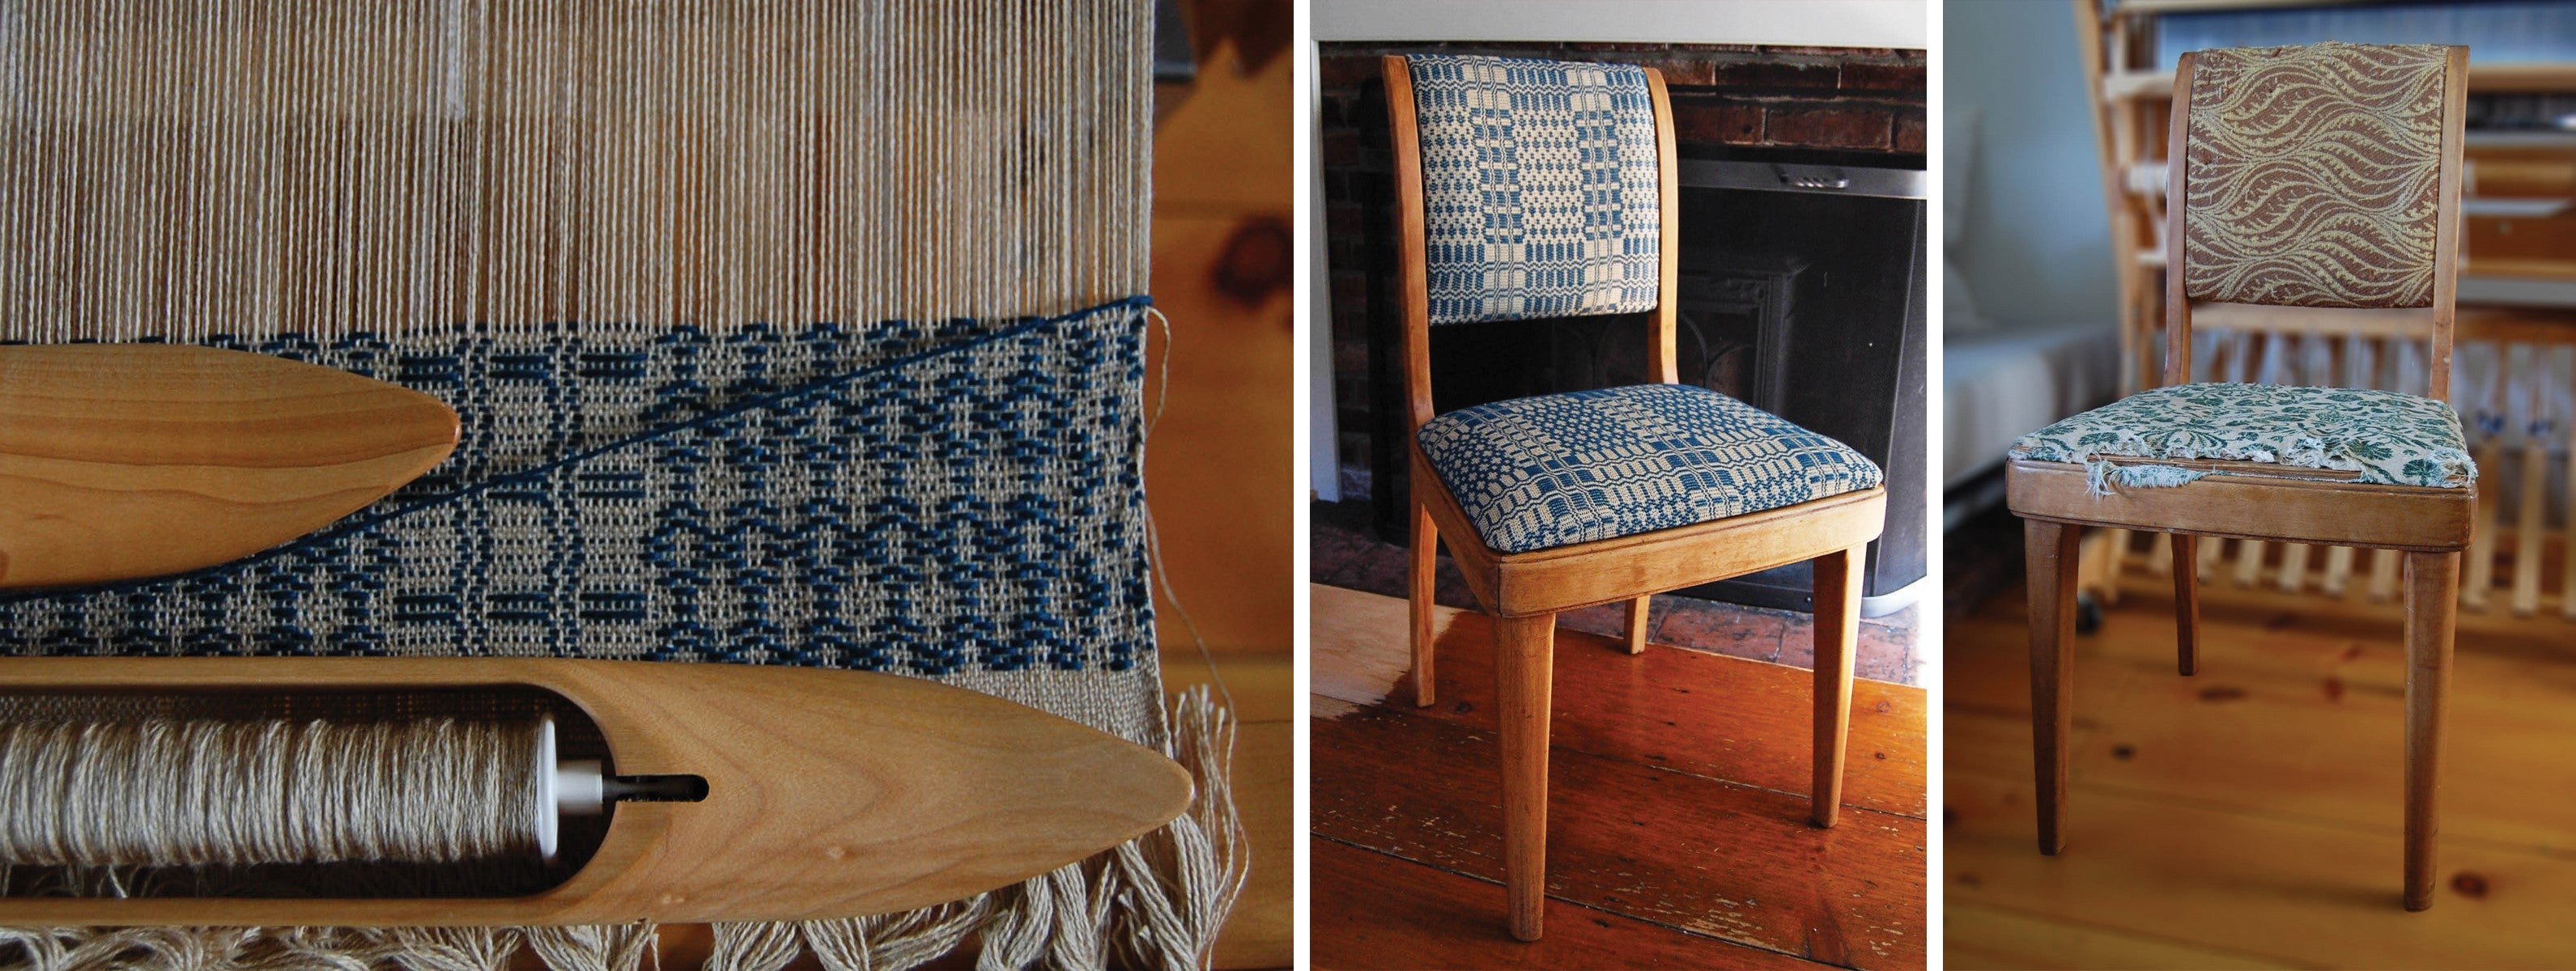 Reupholstering a Chair with Overshot Fabric